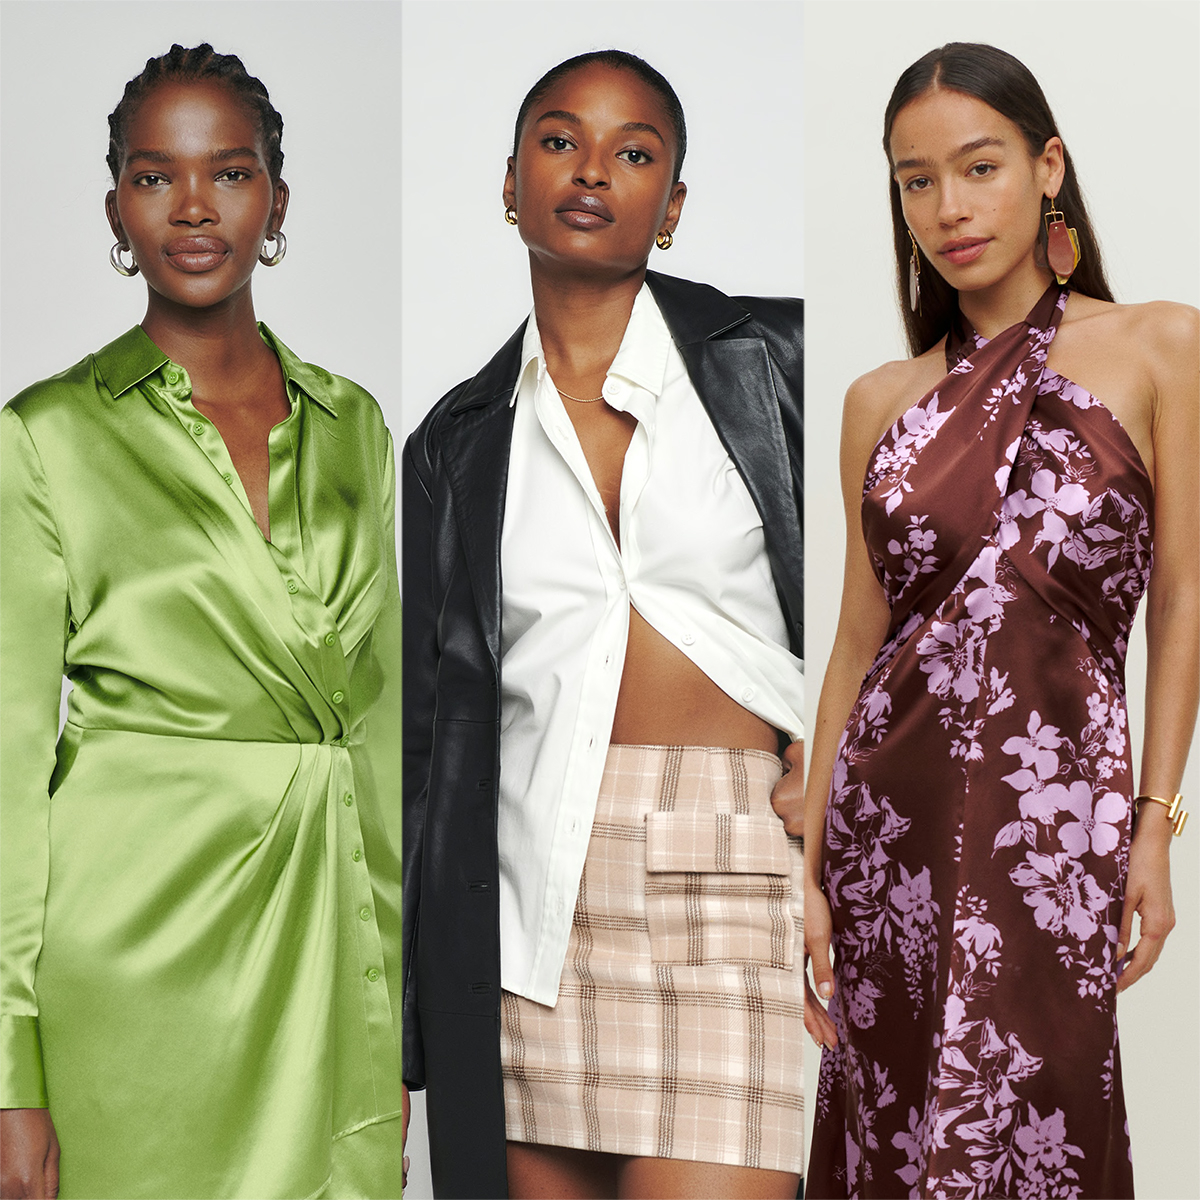 Reformation 70% Off Sale: Get a $298 Silk Dress for $89 & More